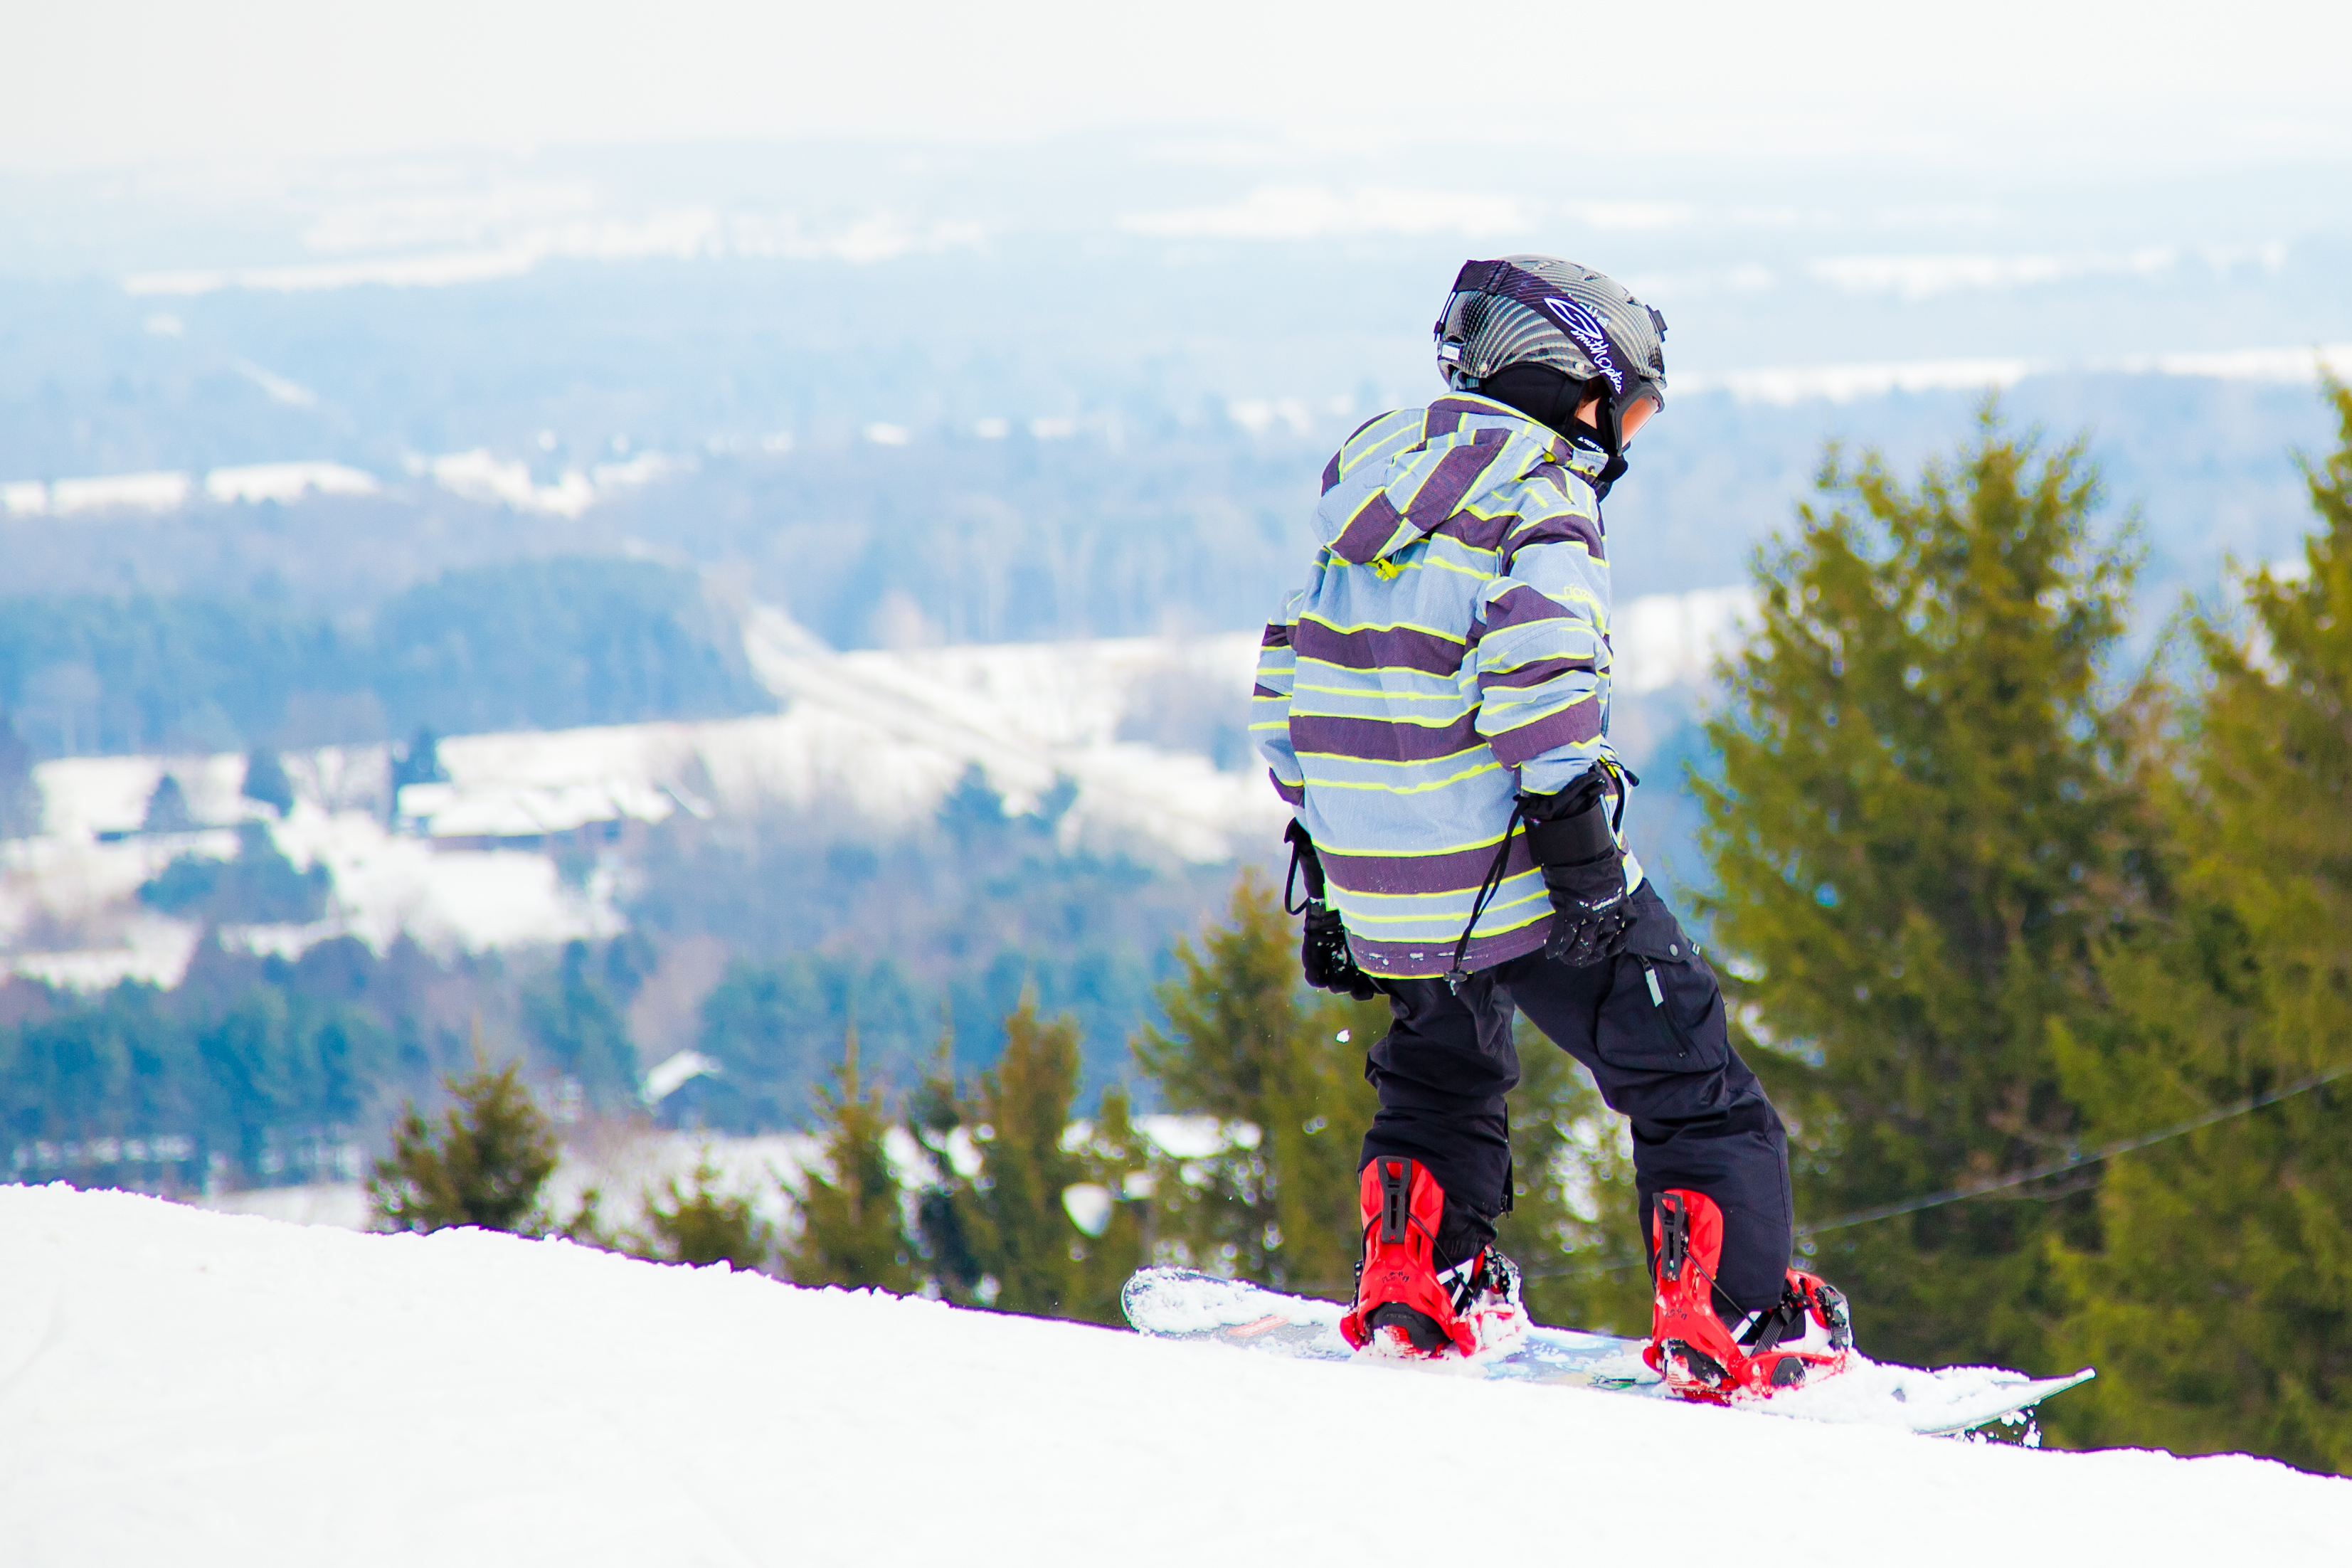 Snowboarder at the top of a ski hill with a view